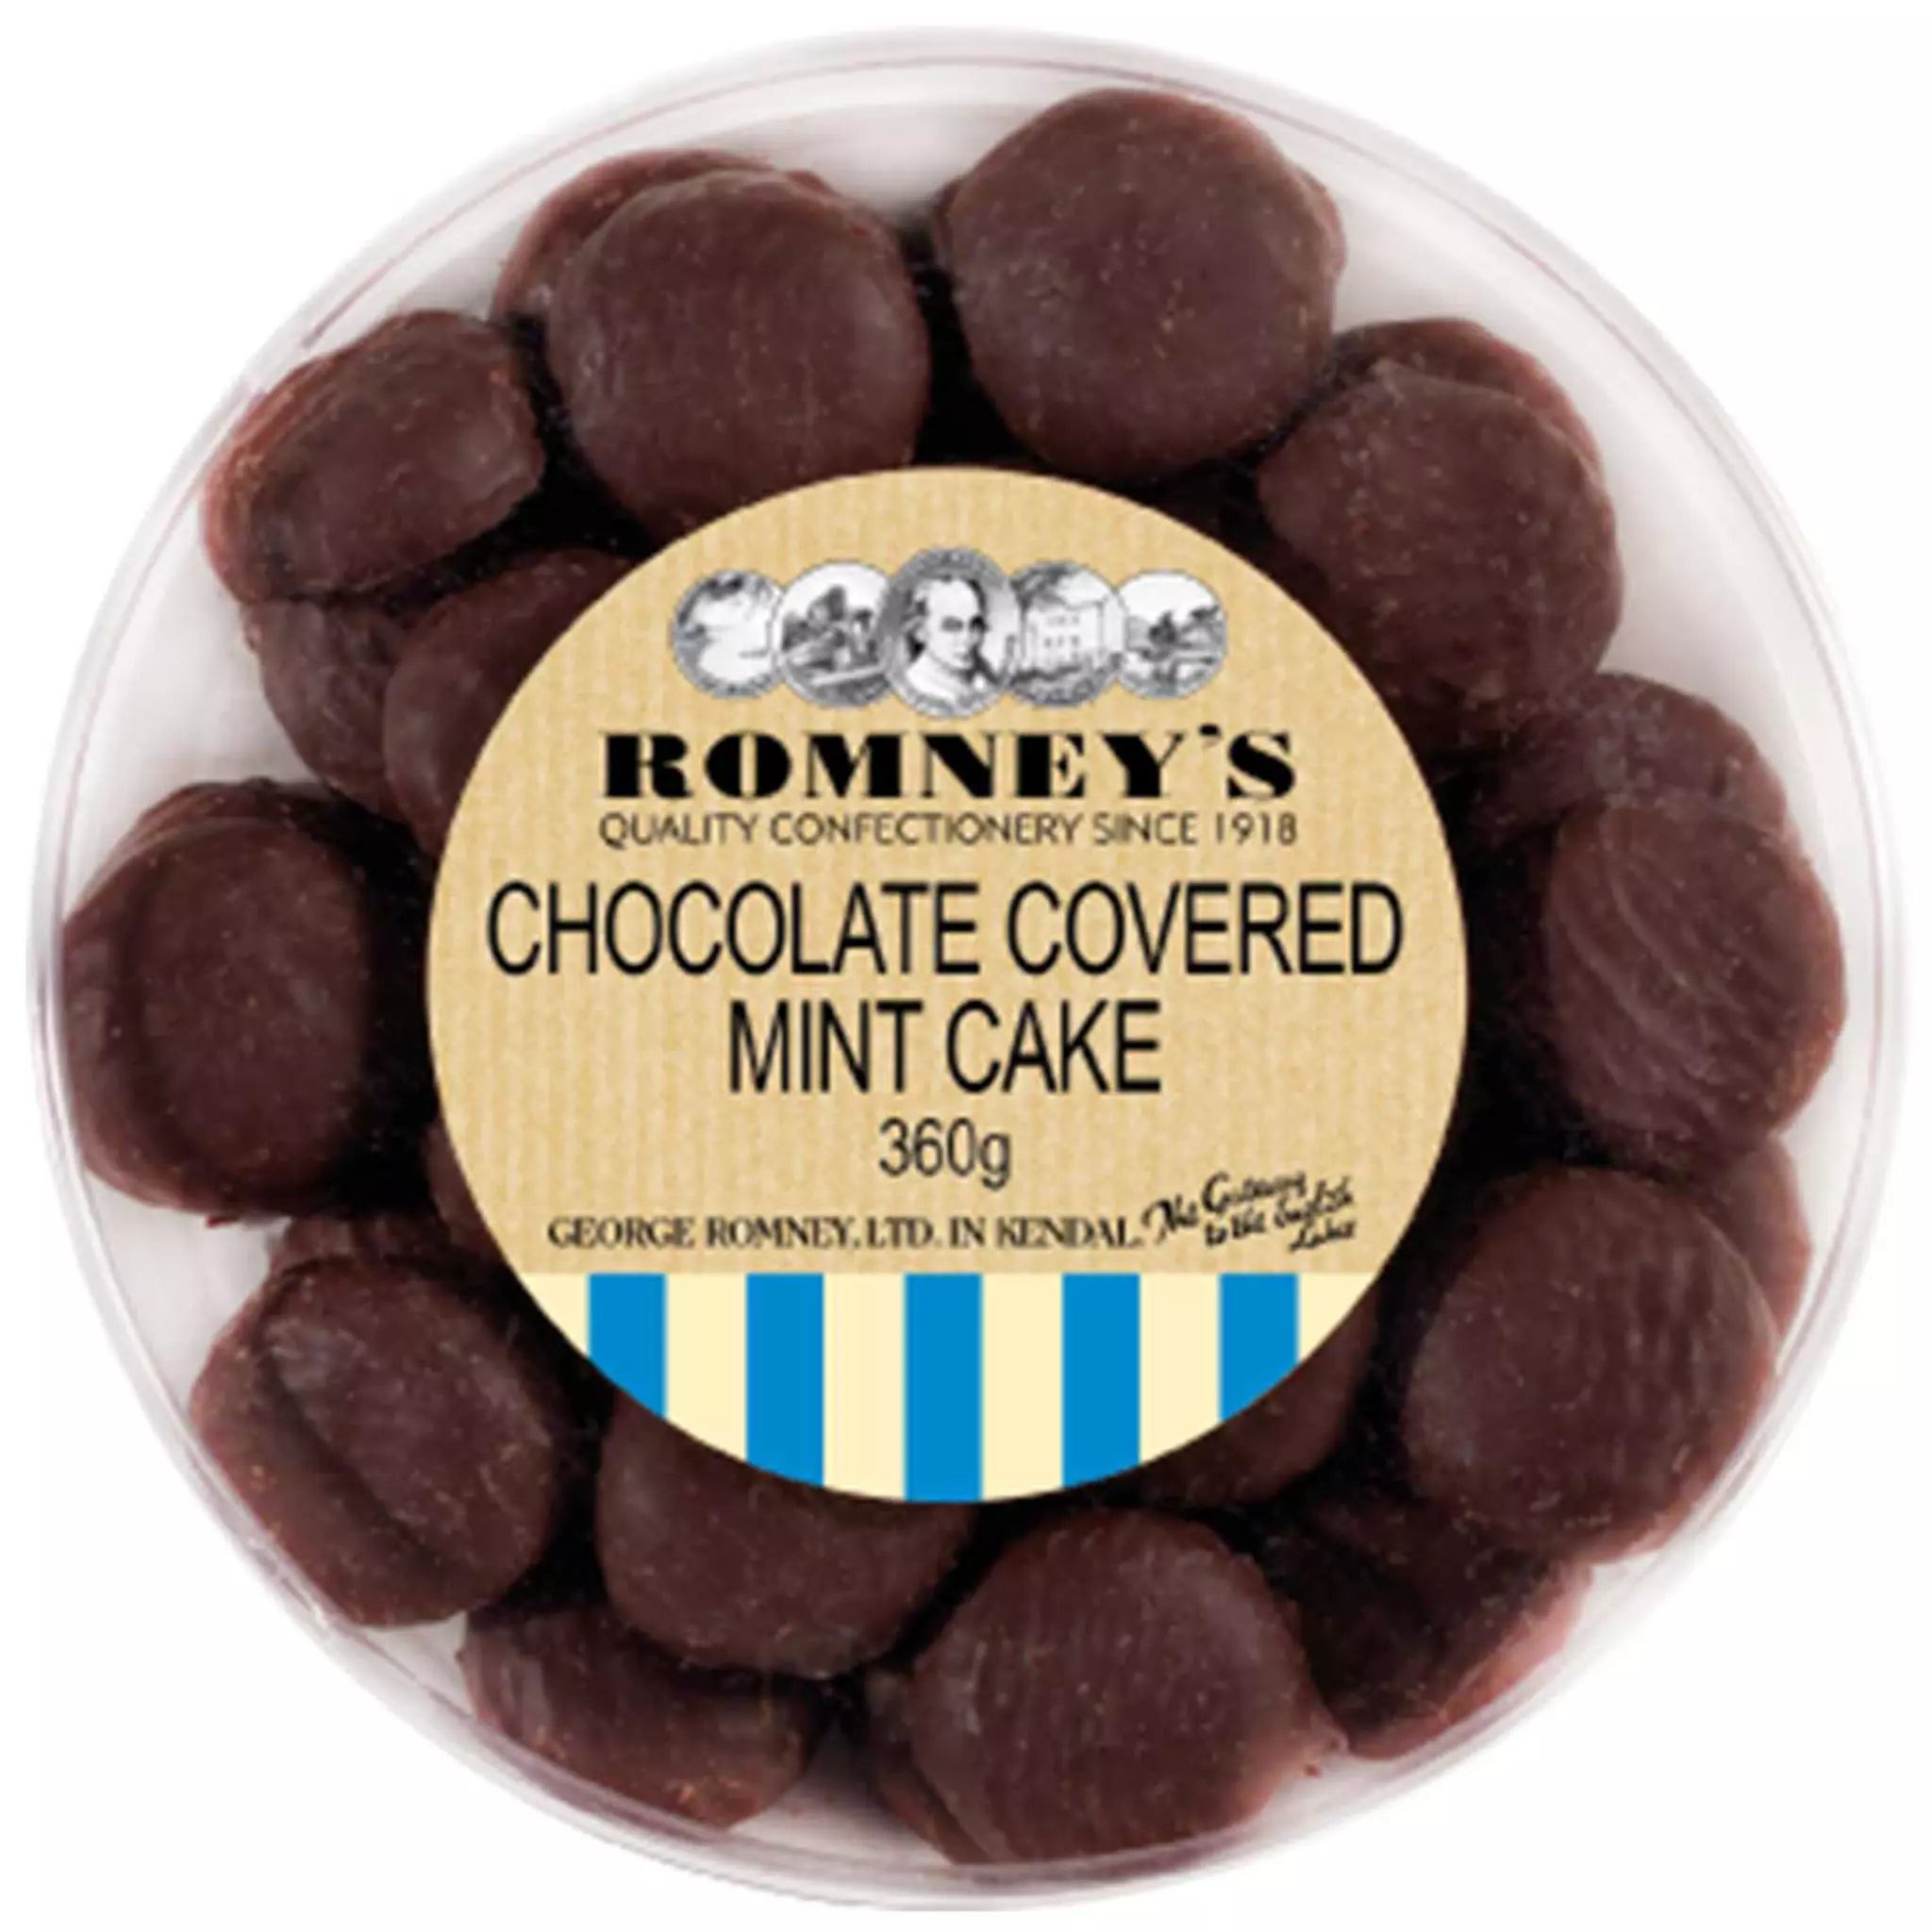 A circular plastic container which is filled with round chocolate coated Kendal Mint Cake deposits. The lid of the tub has a sticker on it that is cream coloured and has the Romney's logo and words 'Chocolate Covered Kendal Mint Cake' on it.